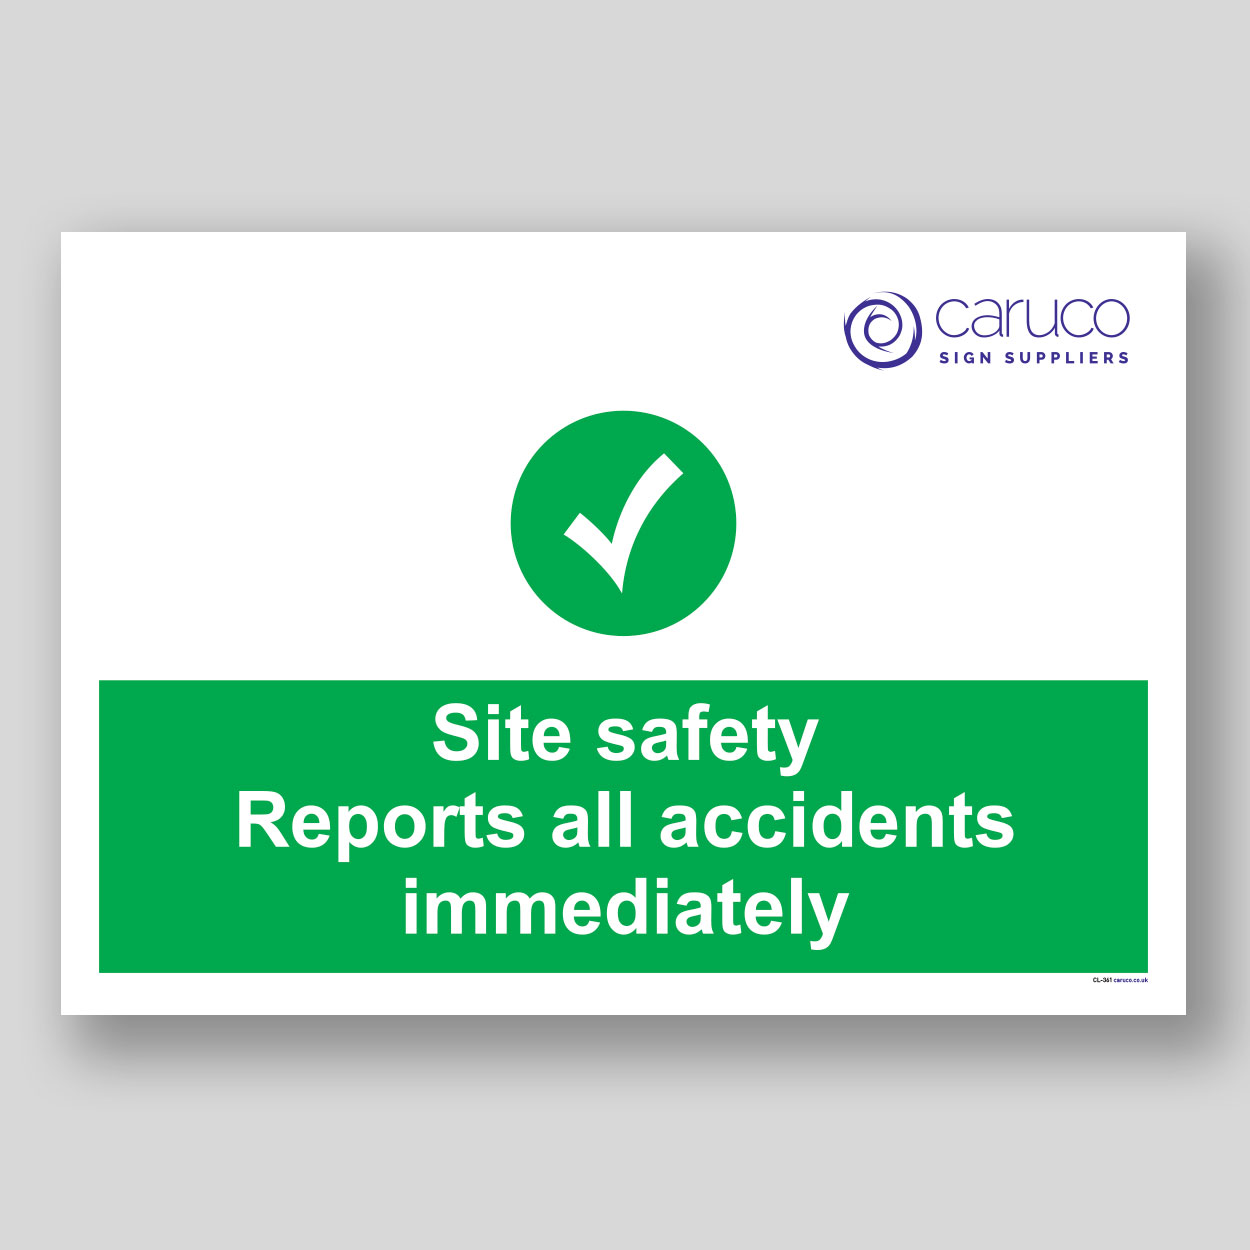 CL-361 Site safety reports